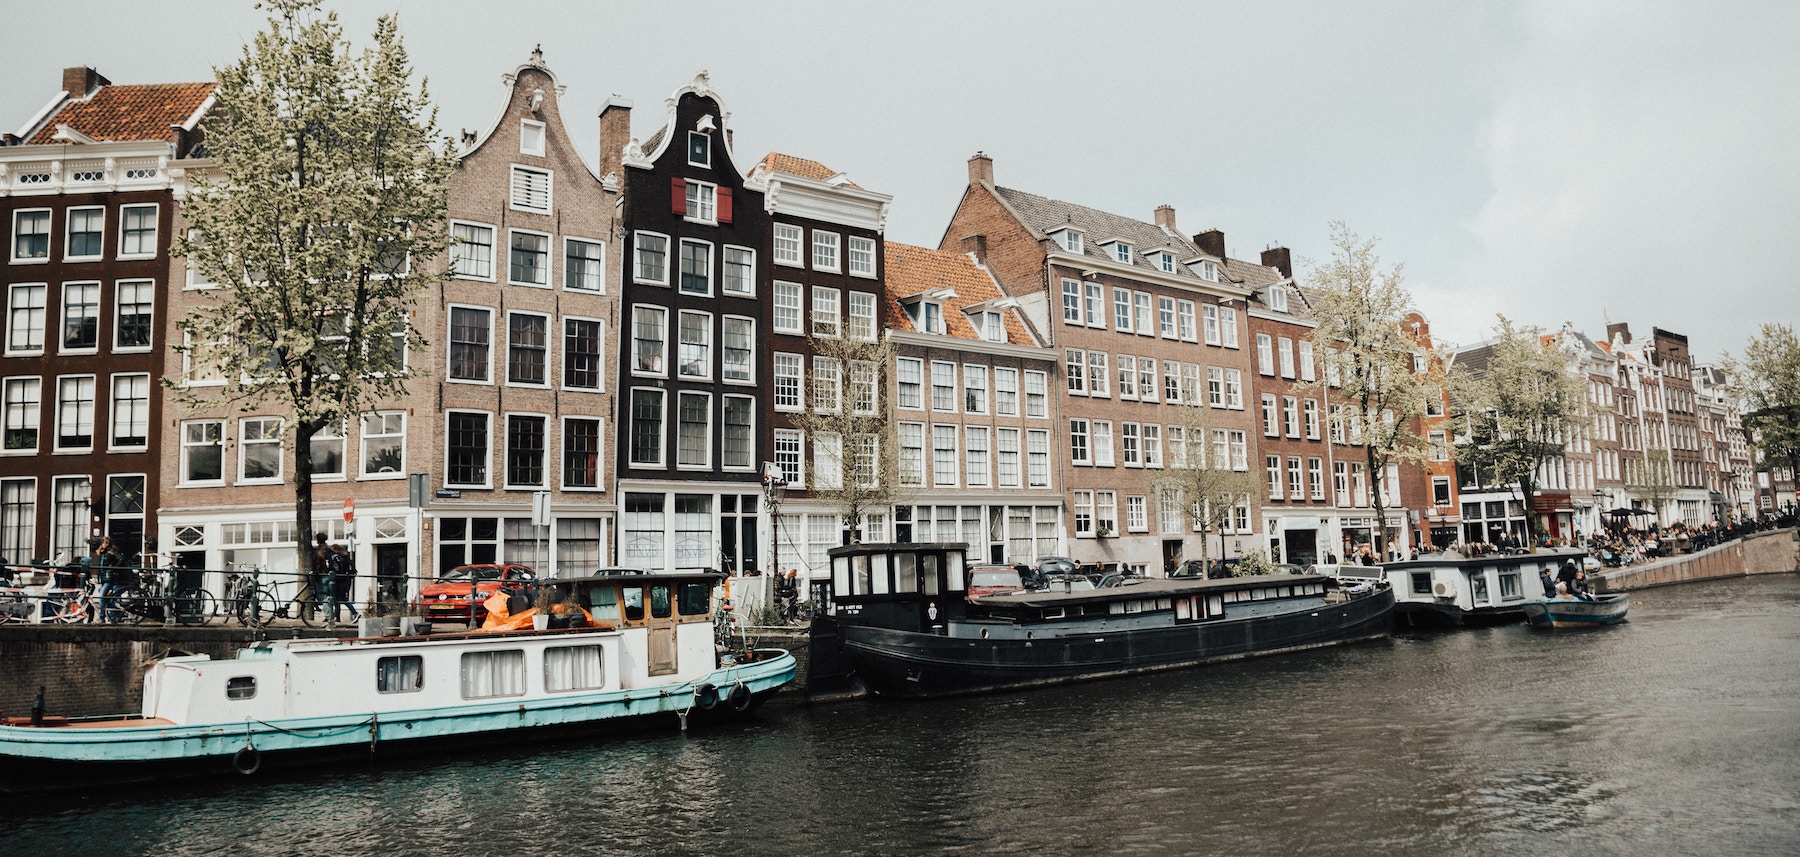 Dutch startup ecosystem gets its own political lobby group – DSA